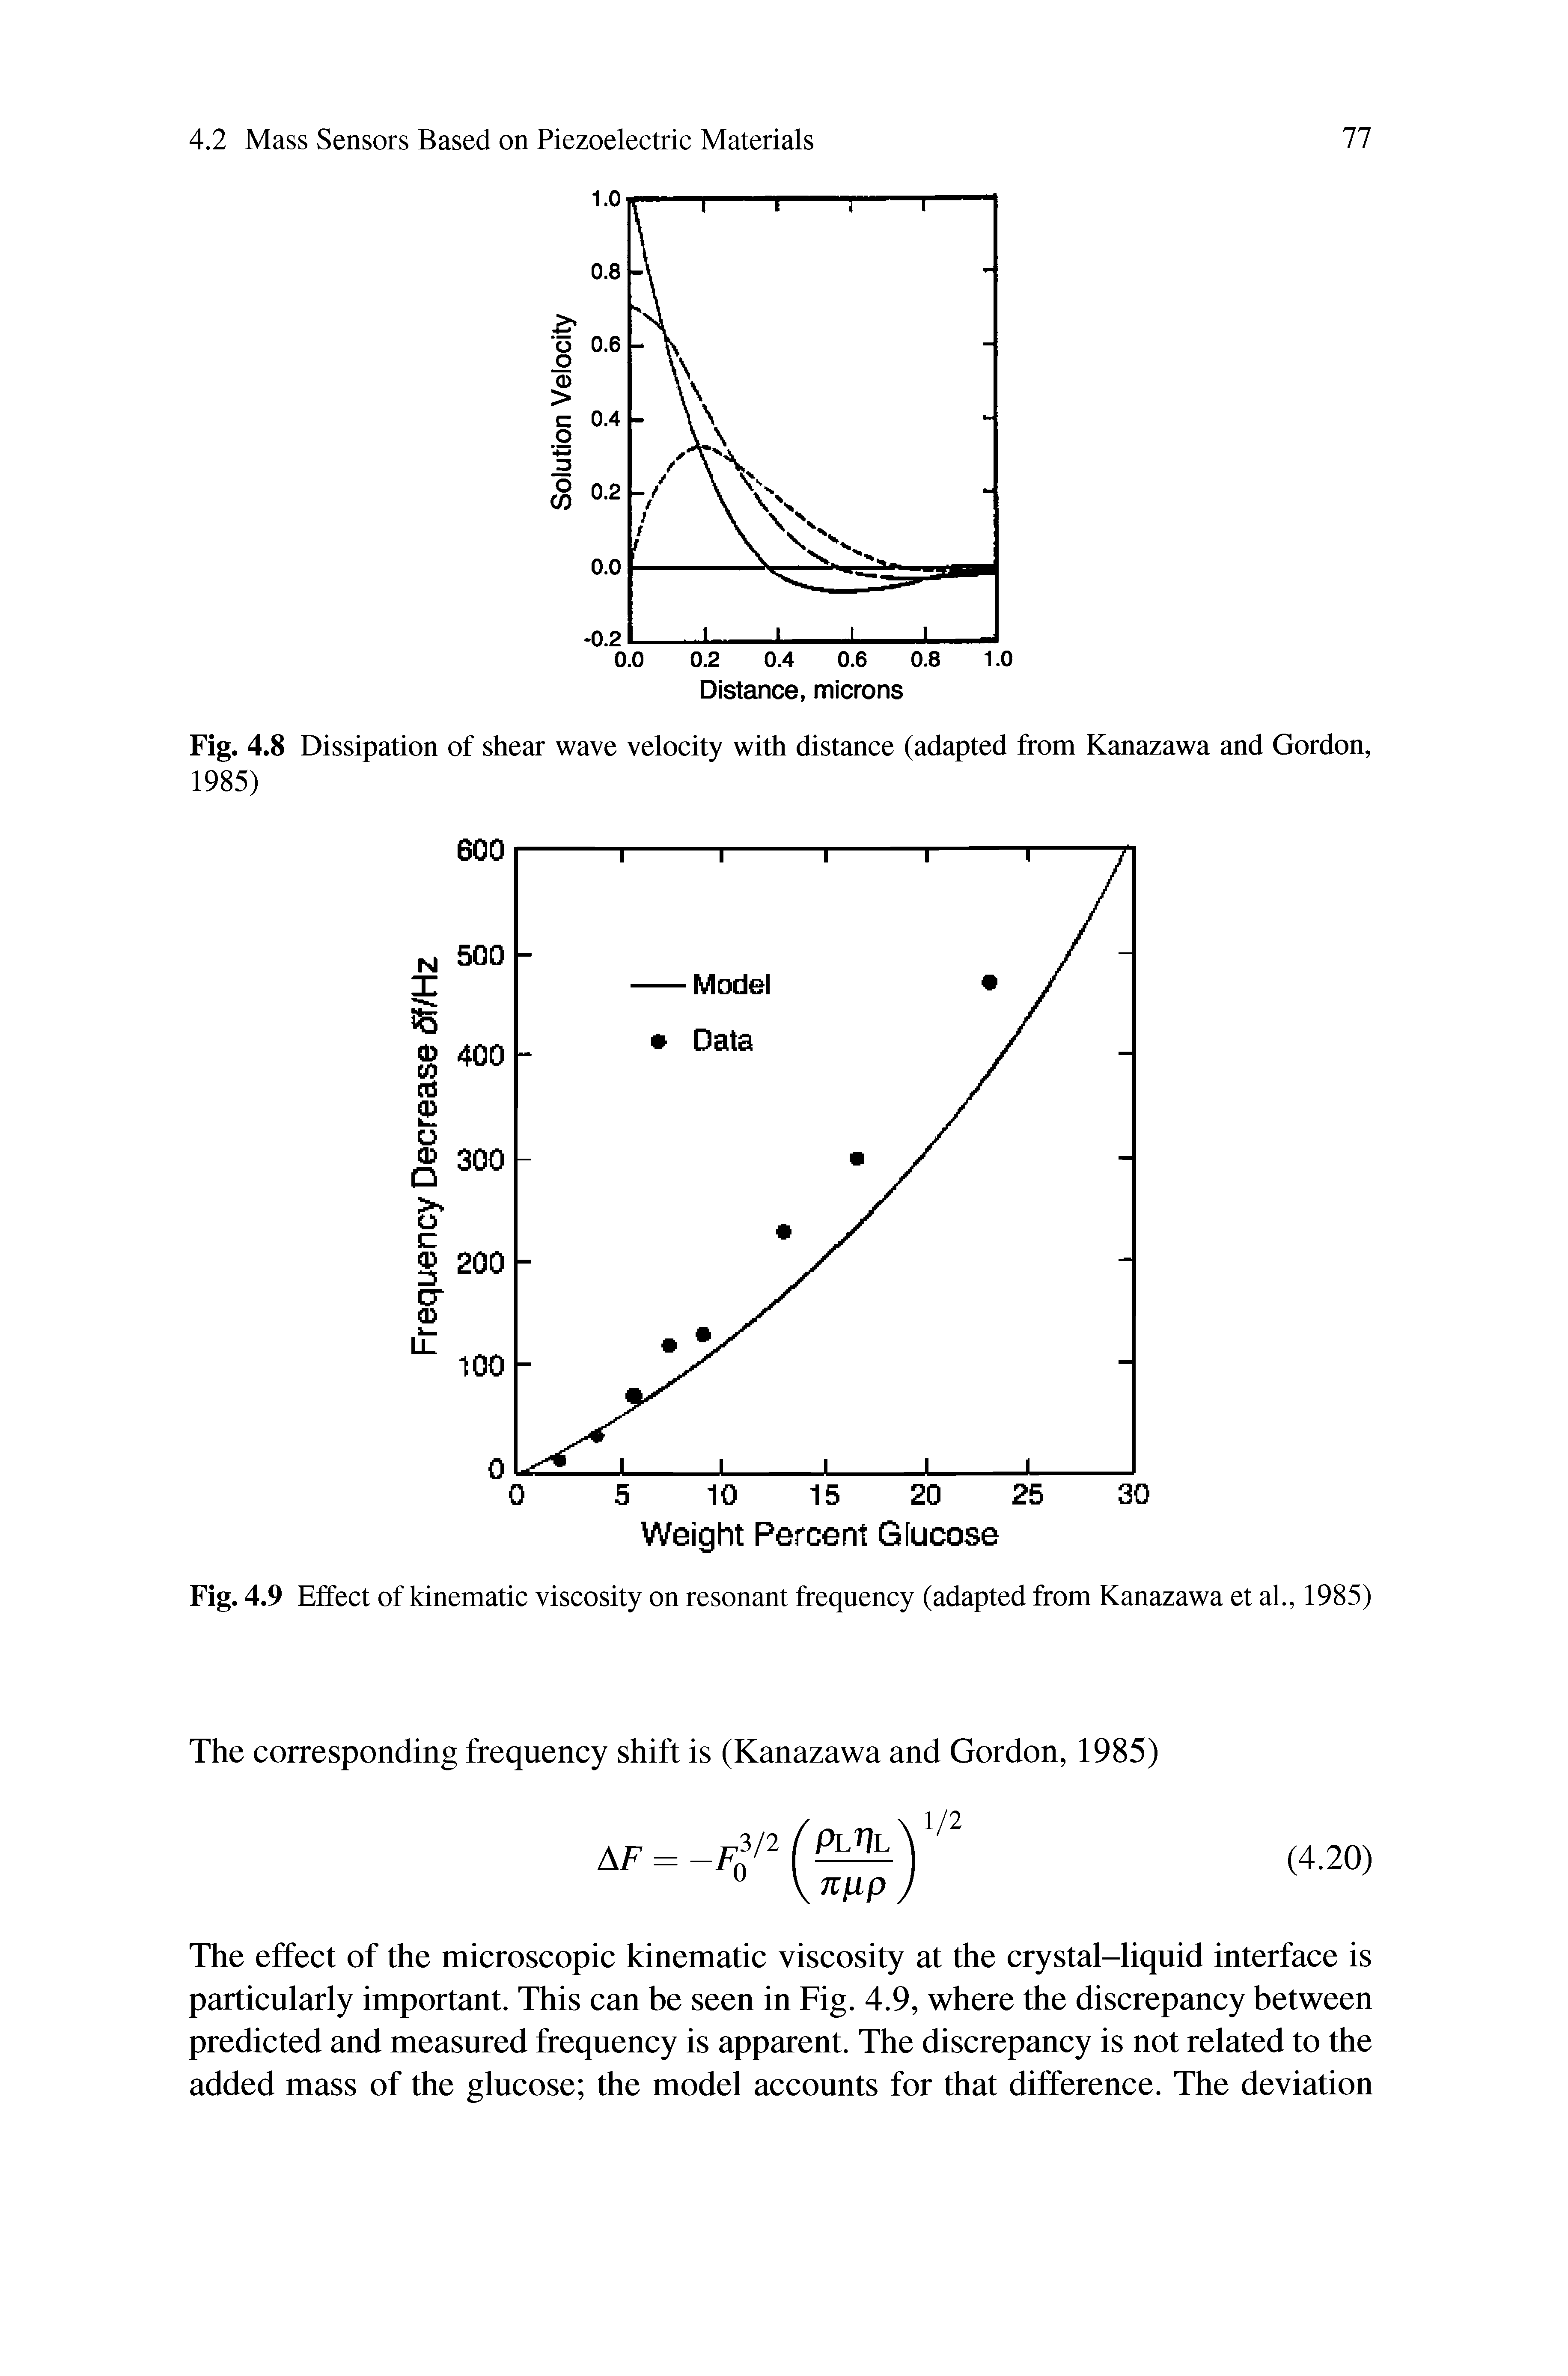 Fig. 4.8 Dissipation of shear wave velocity with distance (adapted from Kanazawa and Gordon, 1985)...